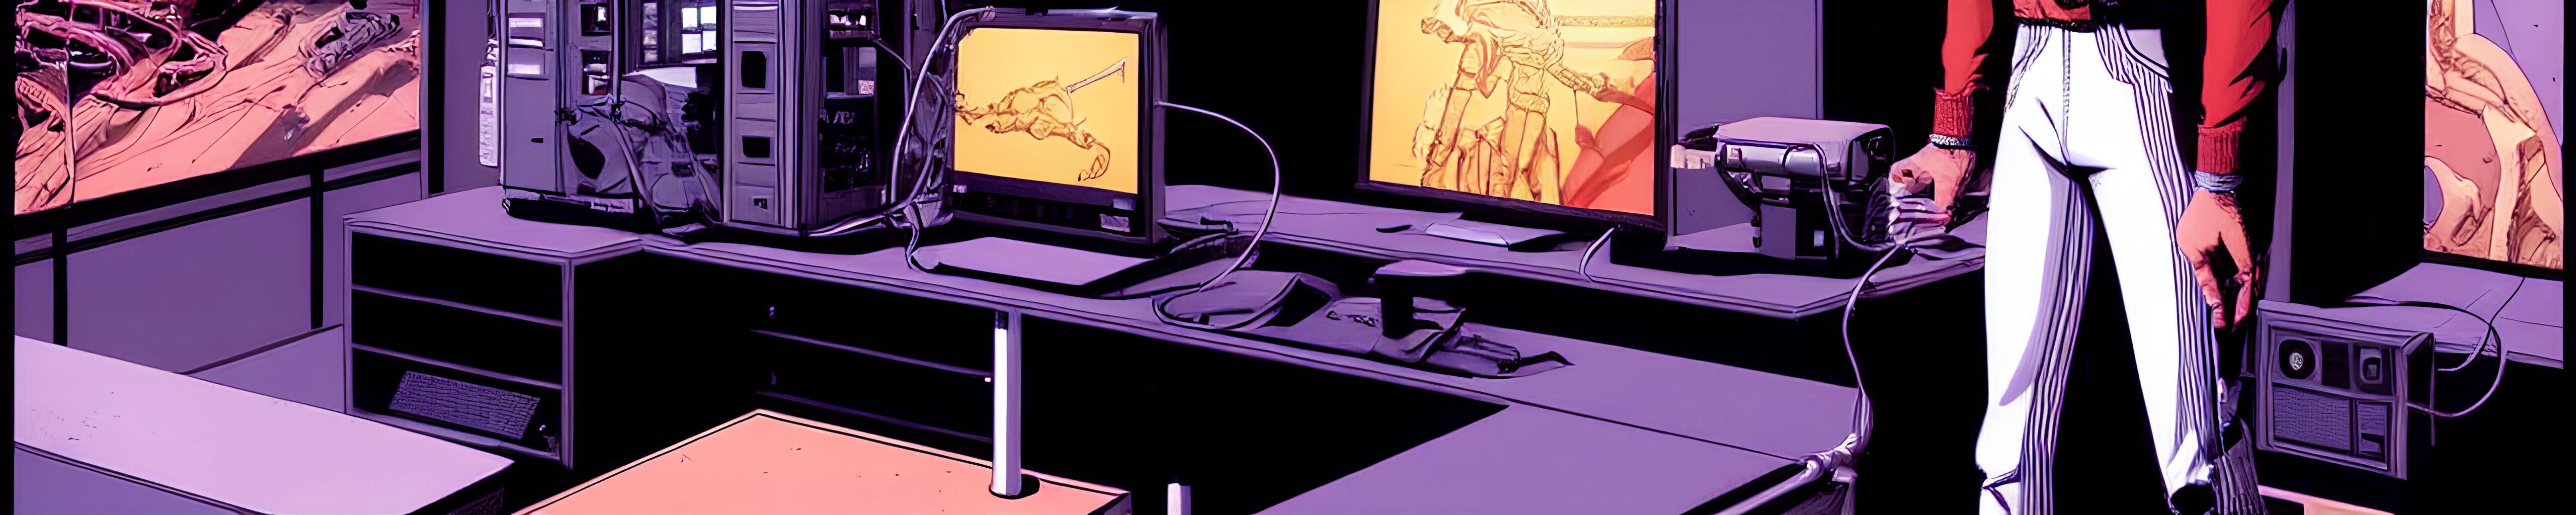 A comic style illustration of a man walking into a room with a computer.